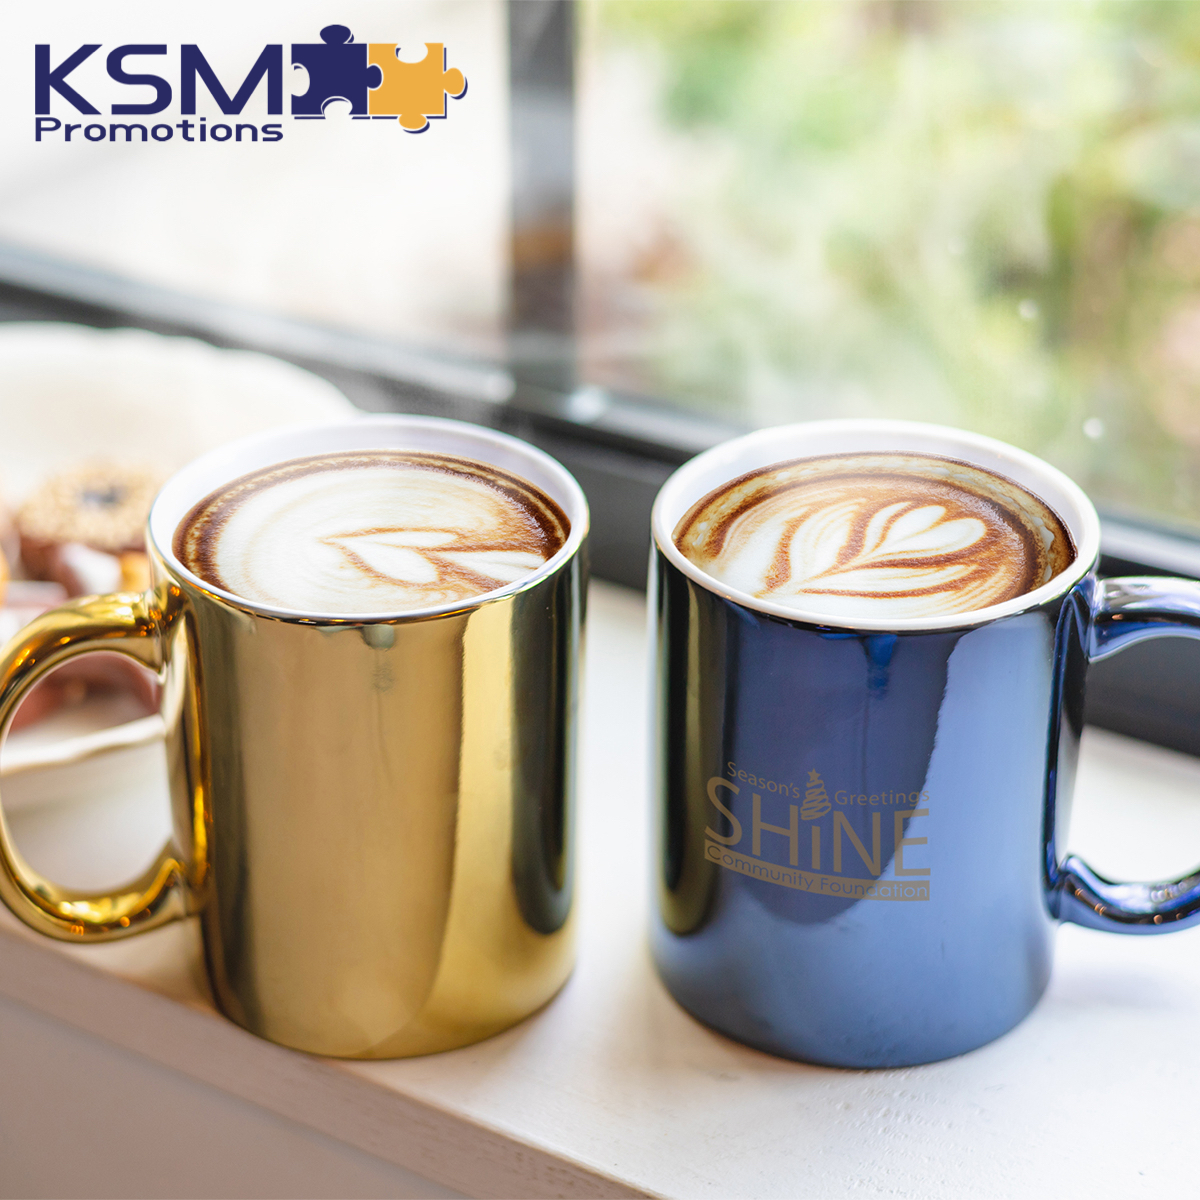 Add a touch of pizazz to your brand with these metallic-finish ceramic mugs. Choose from copper, gold, pearl, silver, or slate blue, whichever matches your brand best. 
Interested?
Let's talk!

#ksmpromotions #businessgifts